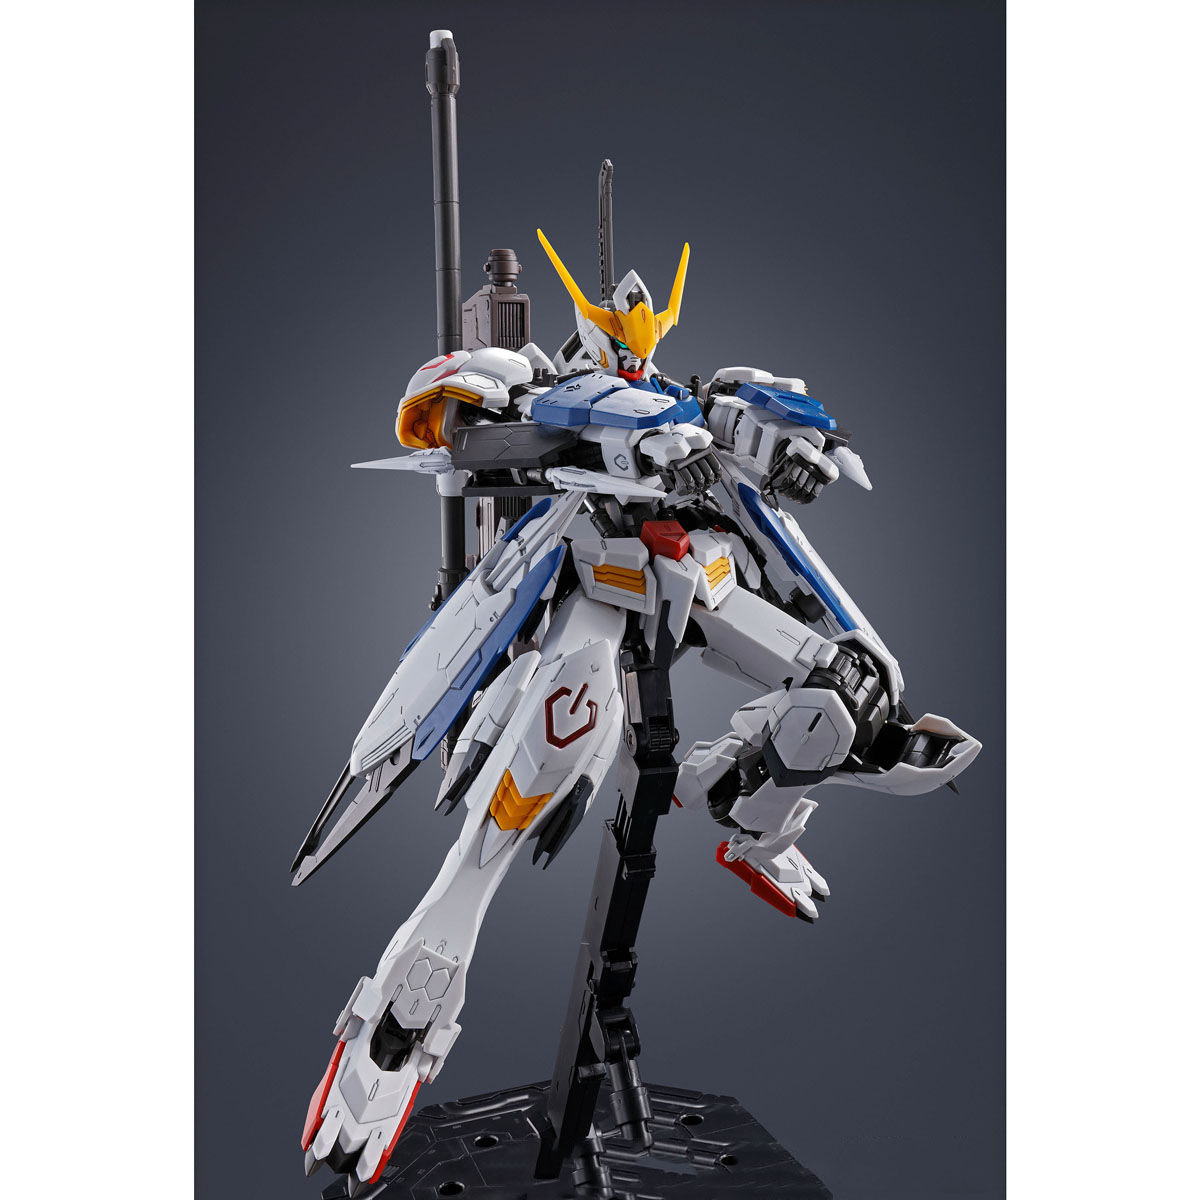 Mg 1 100 Expansion Parts Set For Gundam Barbatos Nov 2020 Delivery Gundam Premium Bandai Singapore Online Store For Action Figures Model Kits Toys And More